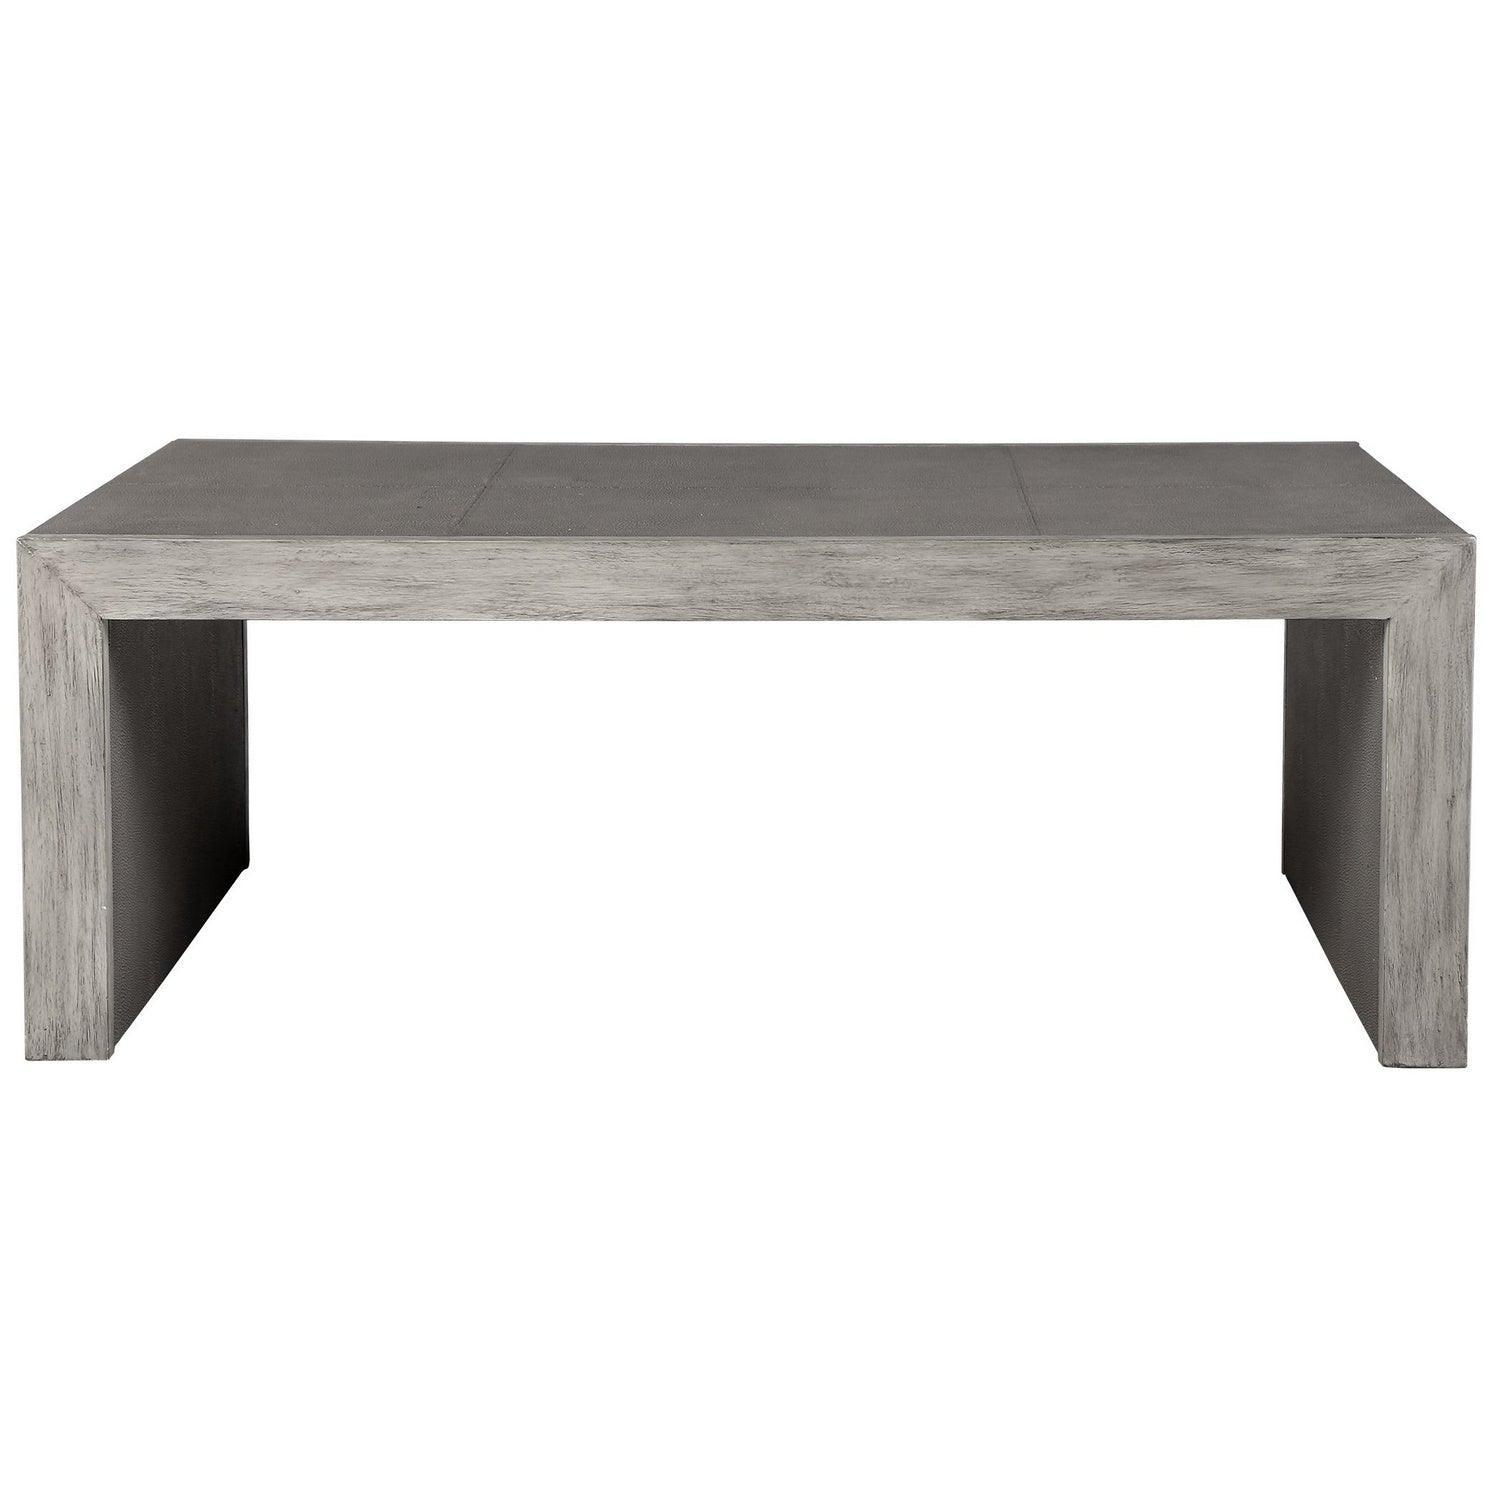 The Uttermost - Aerina Coffee Table - 25213 | Montreal Lighting & Hardware